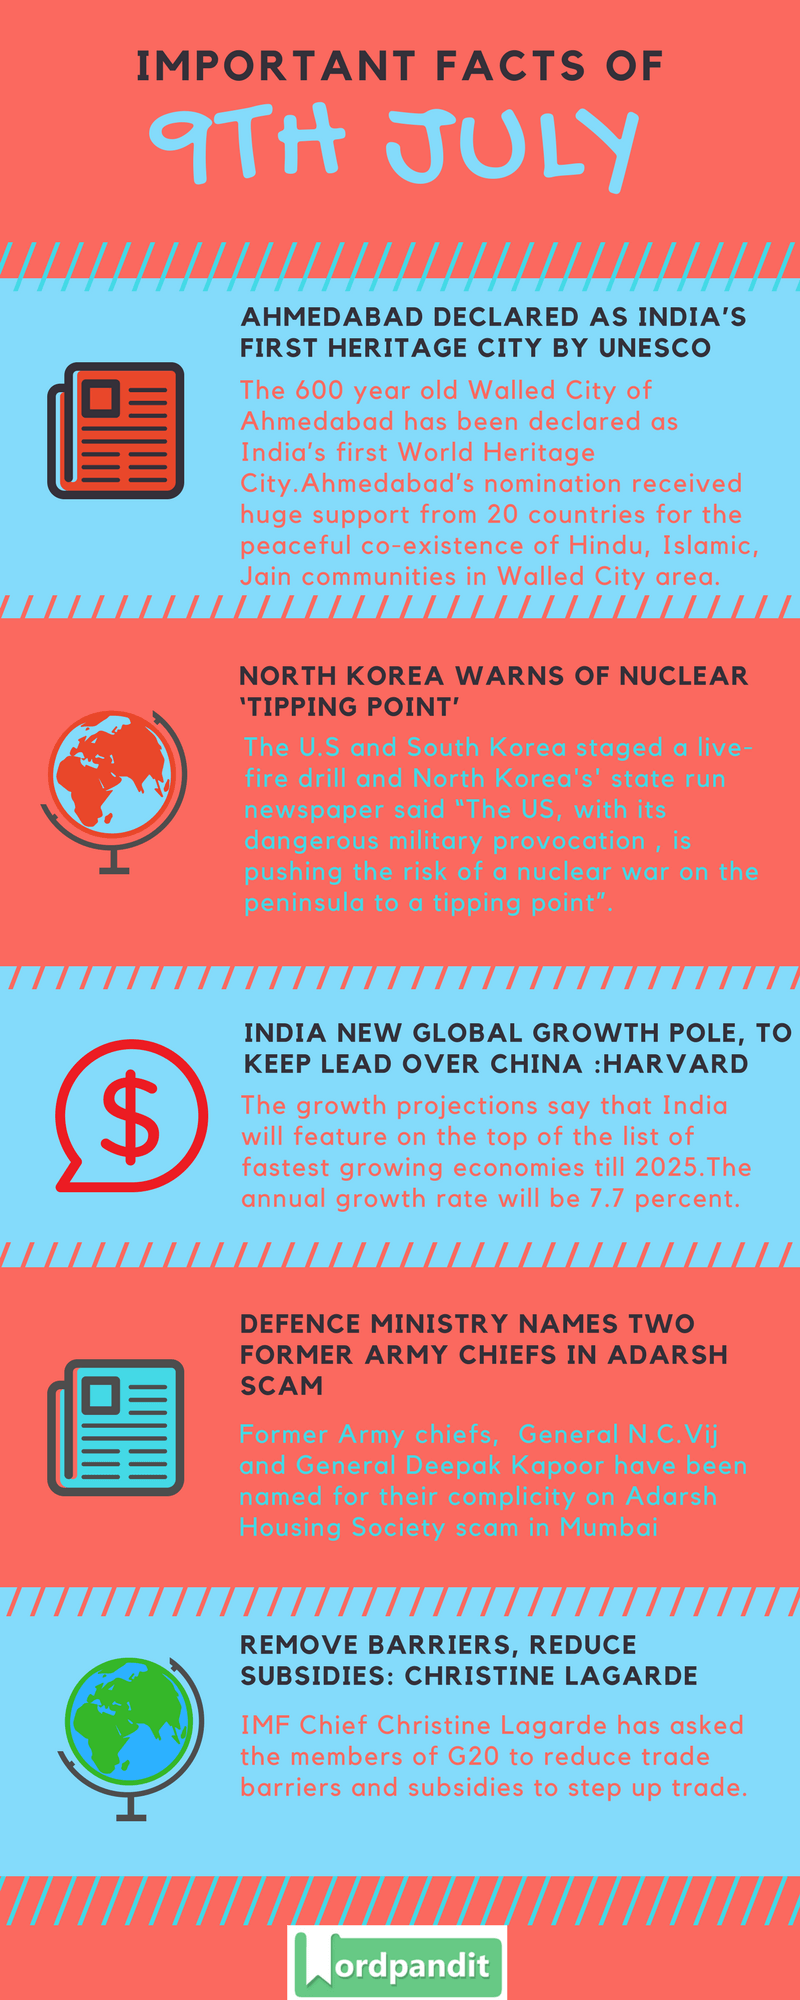 Daily-Current-Affairs-9-july-2017-Current-Affairs-Quiz-july-9-2017-Current-Affairs-Infographic